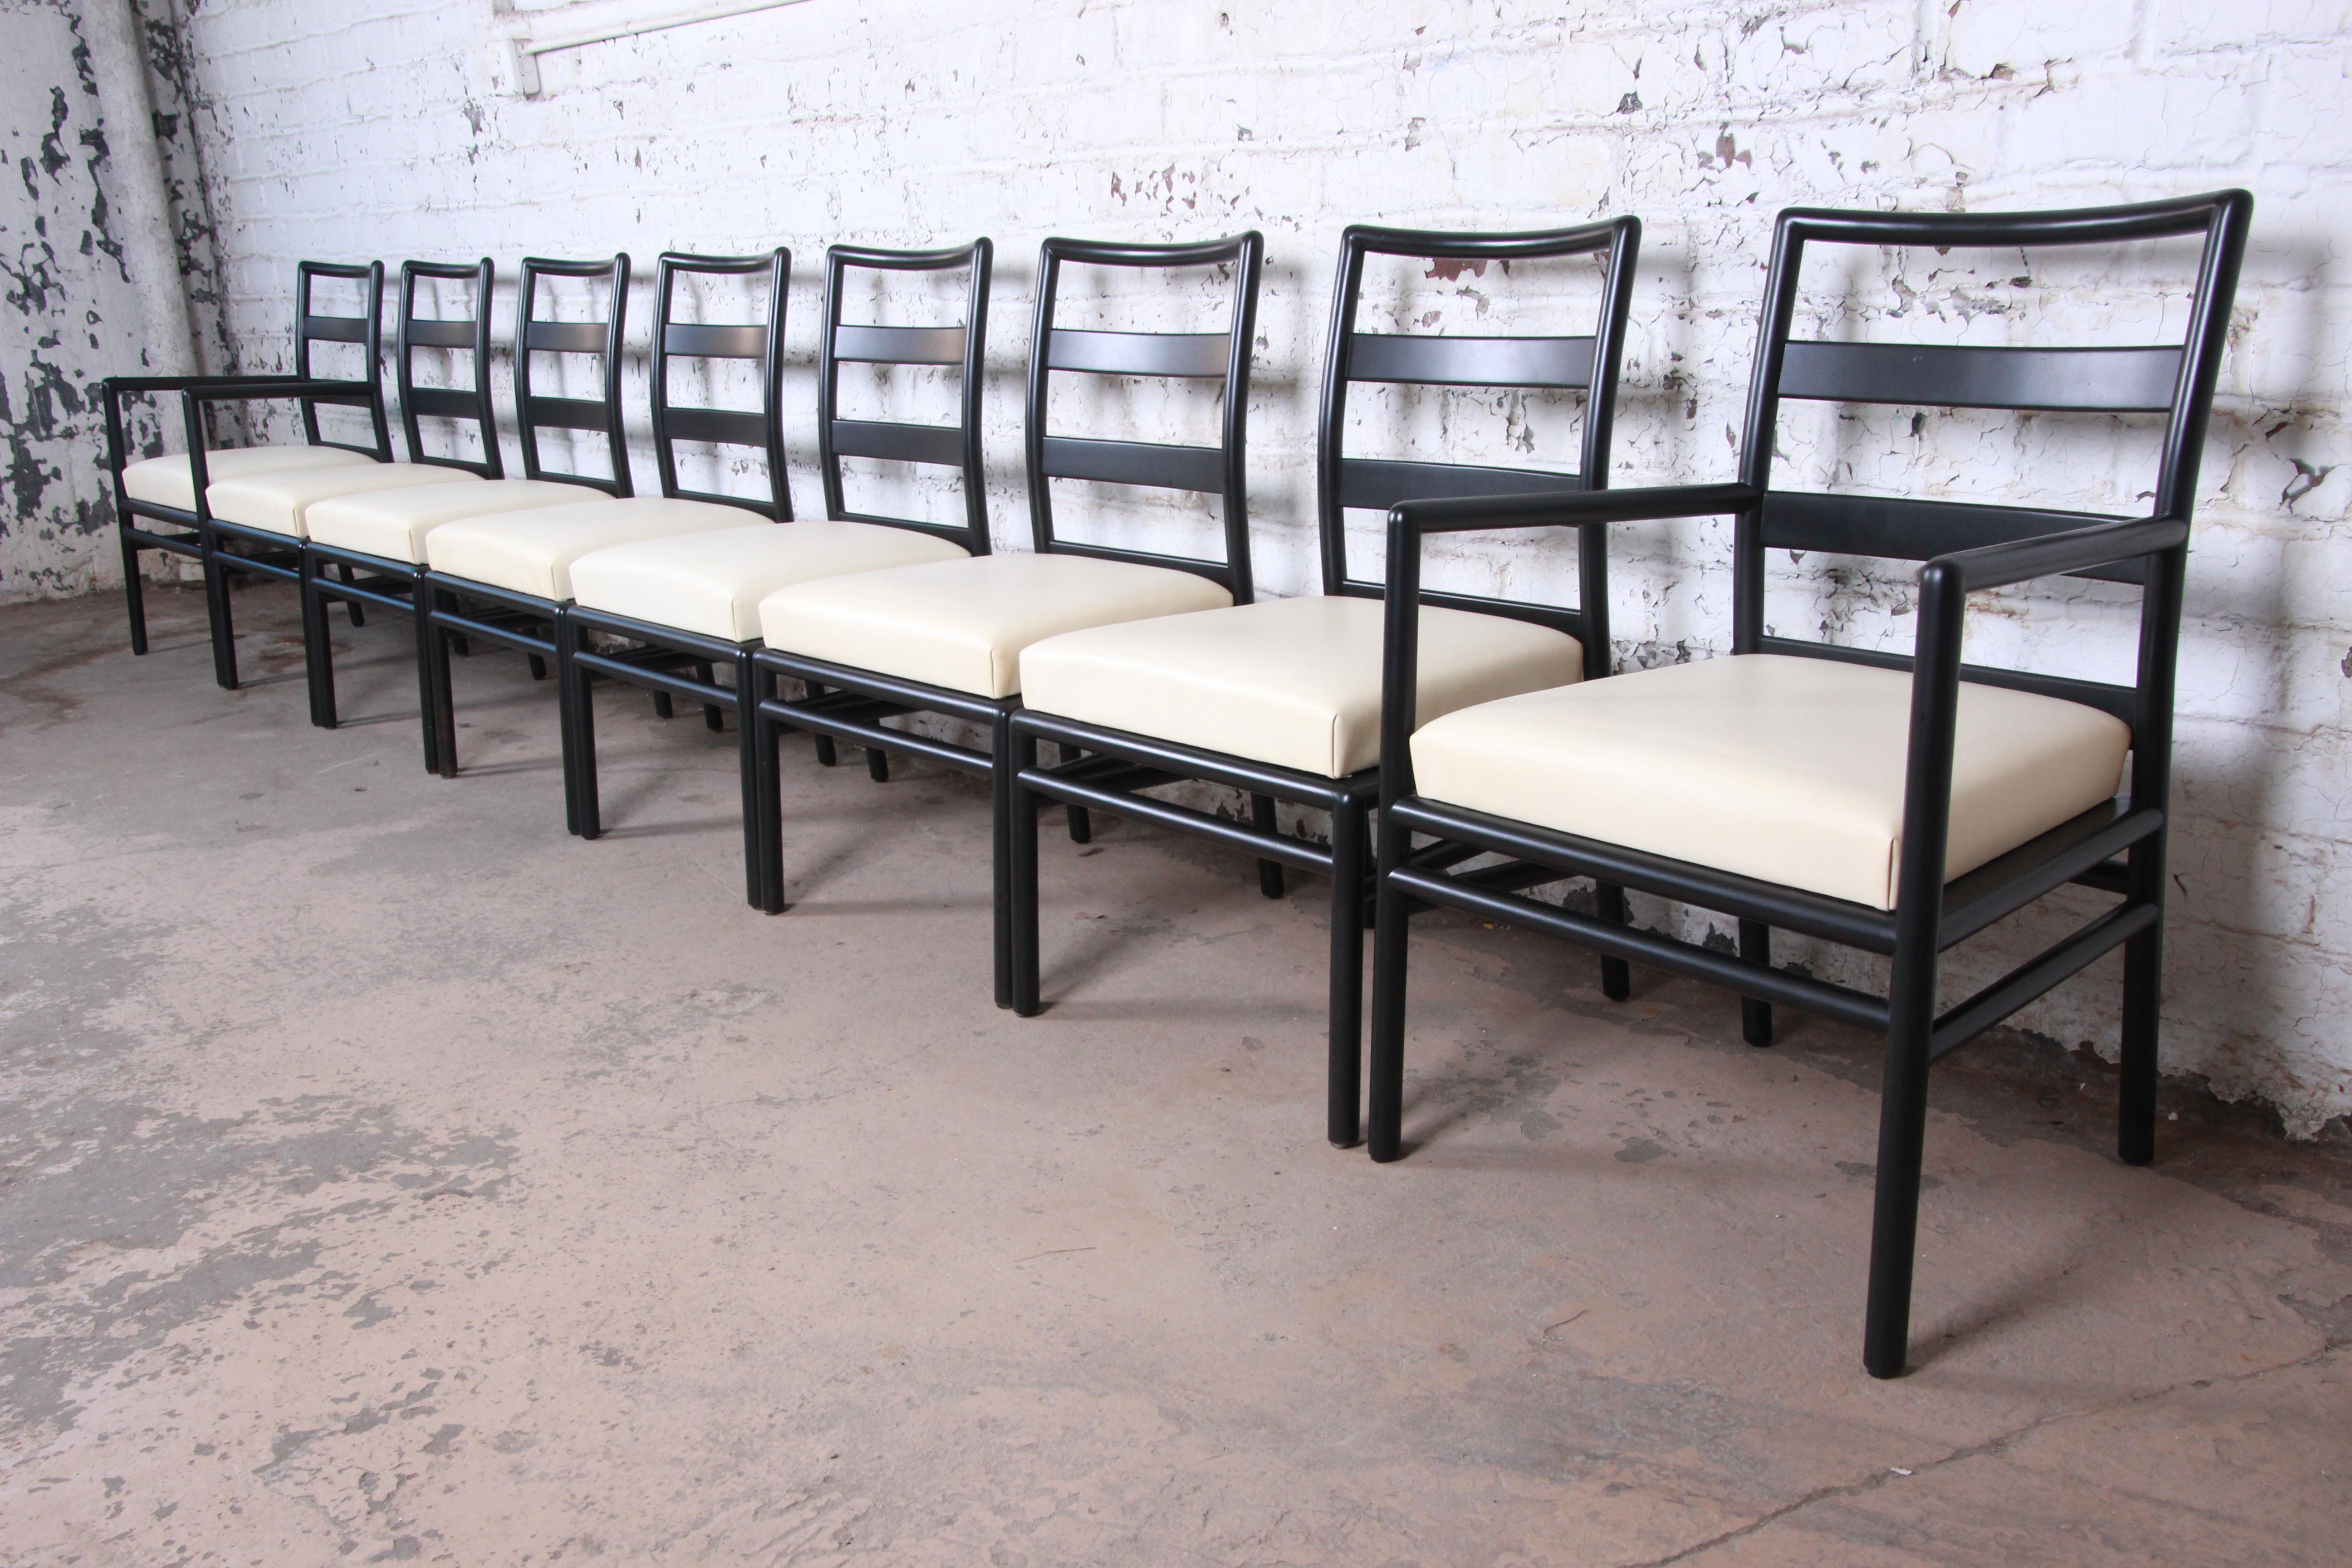 An outstanding set of eight Mid-Century Modern dining chairs designed by T.H. Robsjohn-Gibbings for Widdicomb. The set includes two captain armchairs and six side chairs. The chairs feature a Minimalist ladder back design, with black lacquered